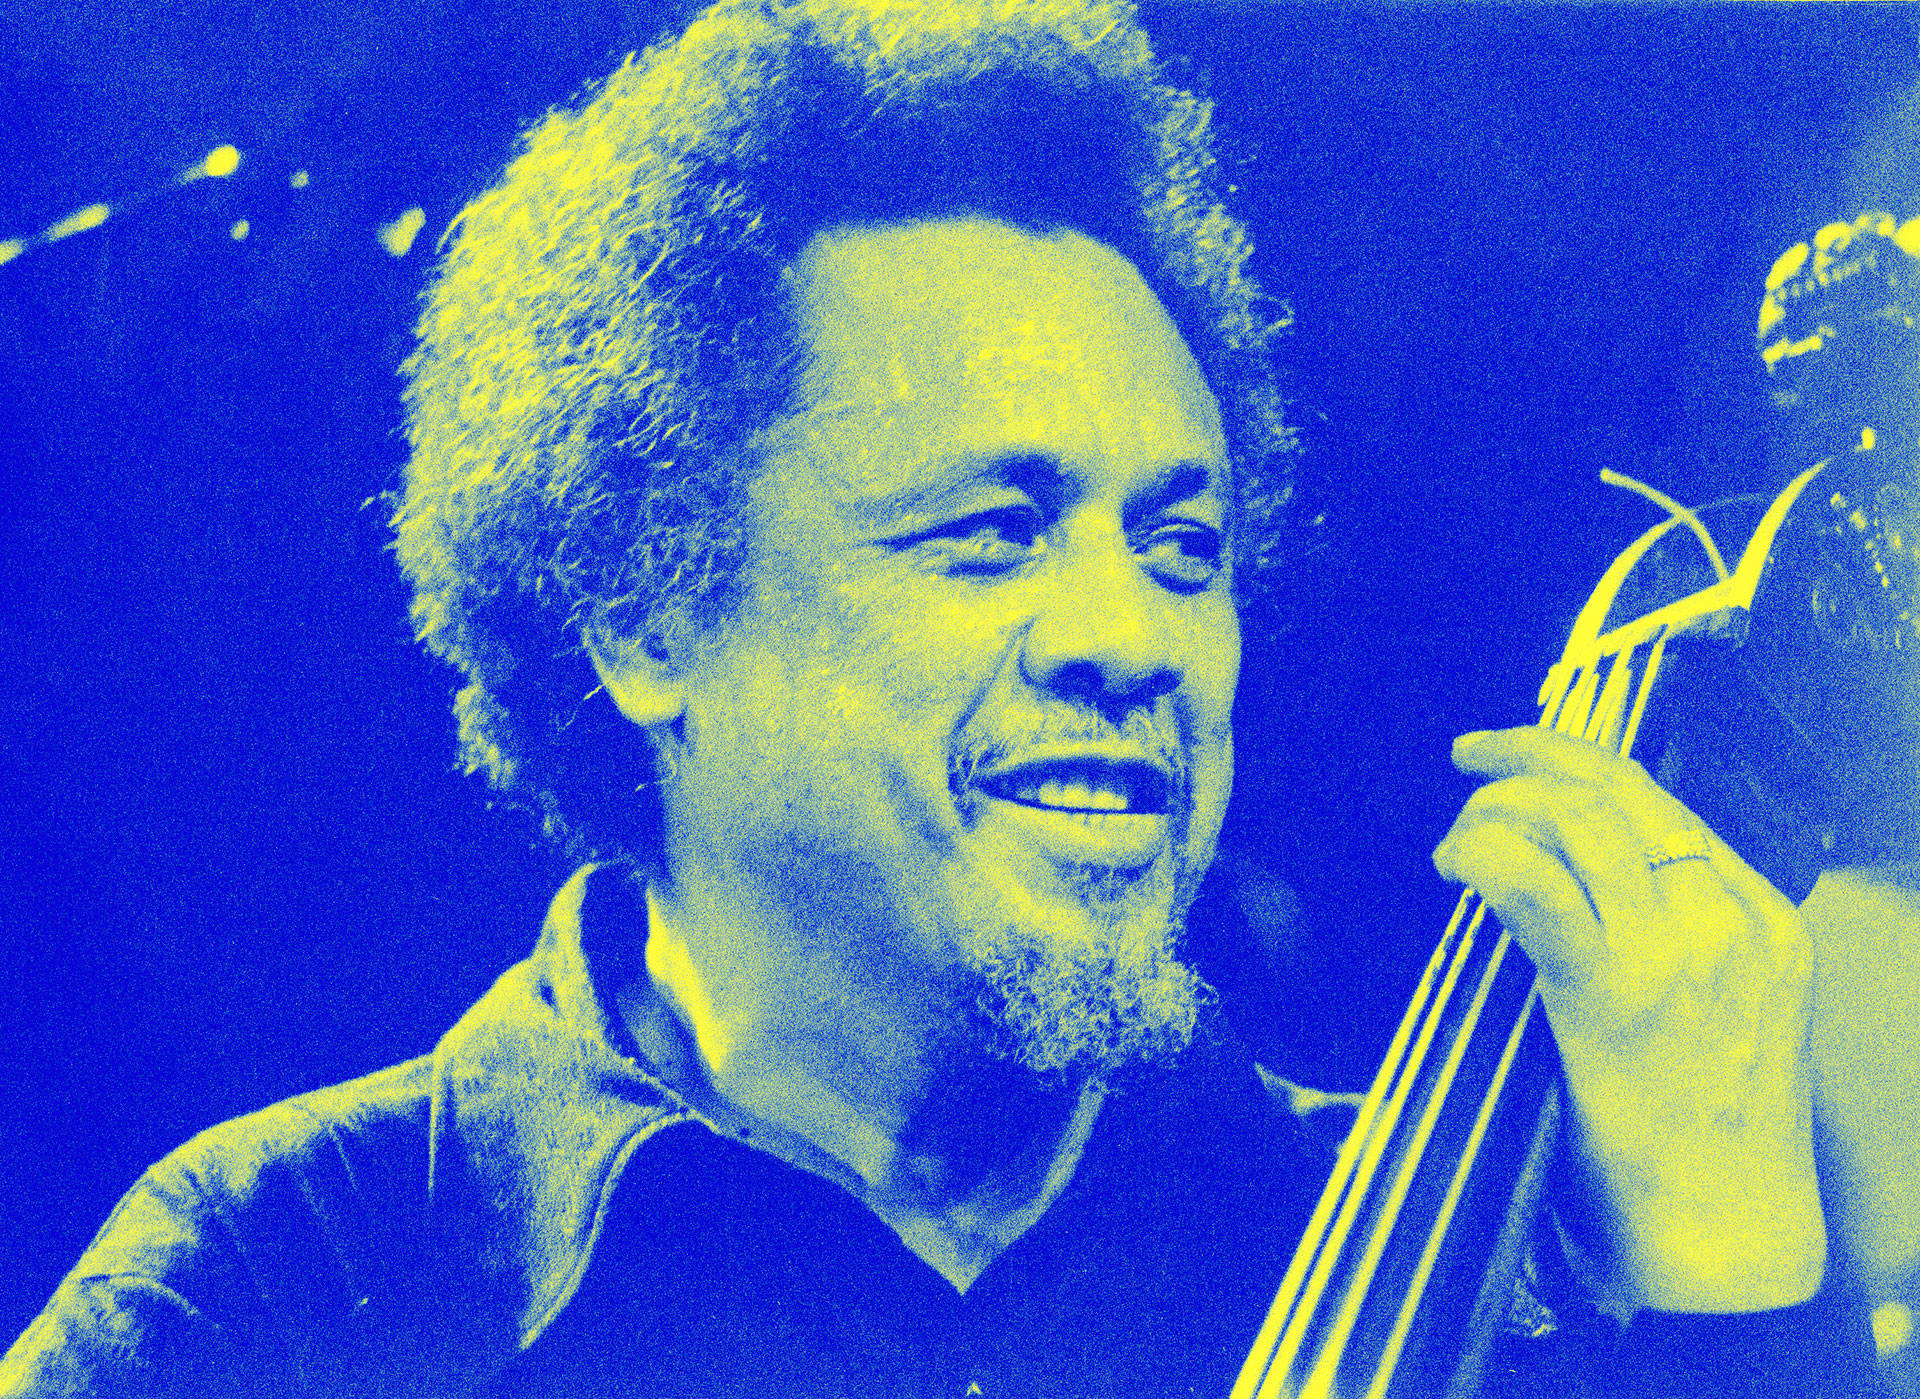 Charles Mingus Over-Saturated Photo Wallpaper